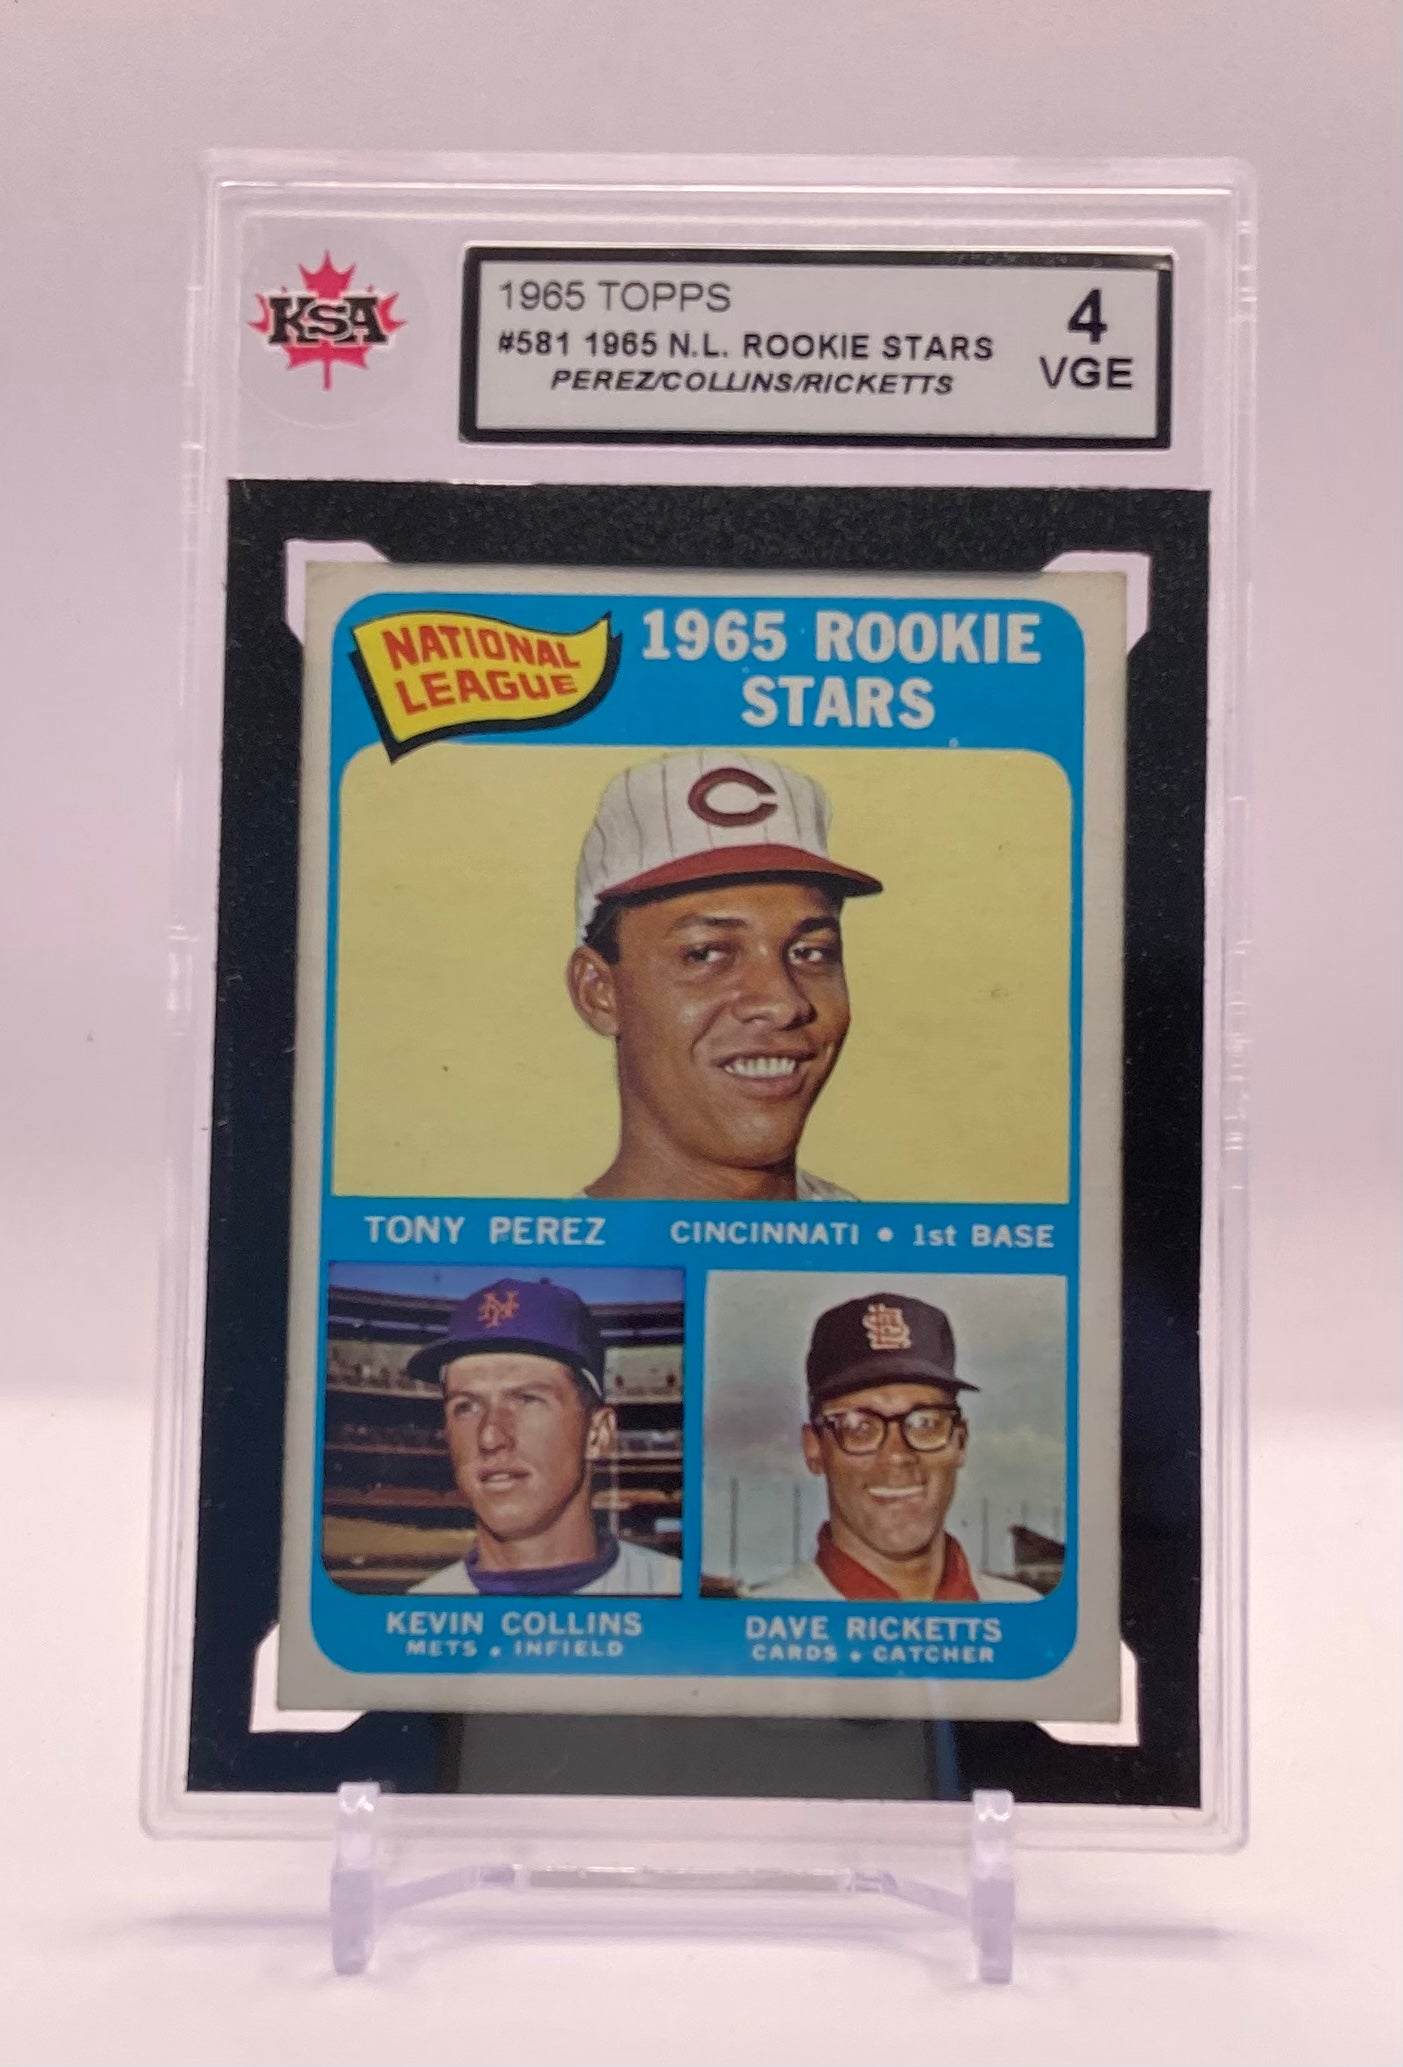 1965 #581 PEREZ/COLLINS/RICKETTS TOPPS N.L